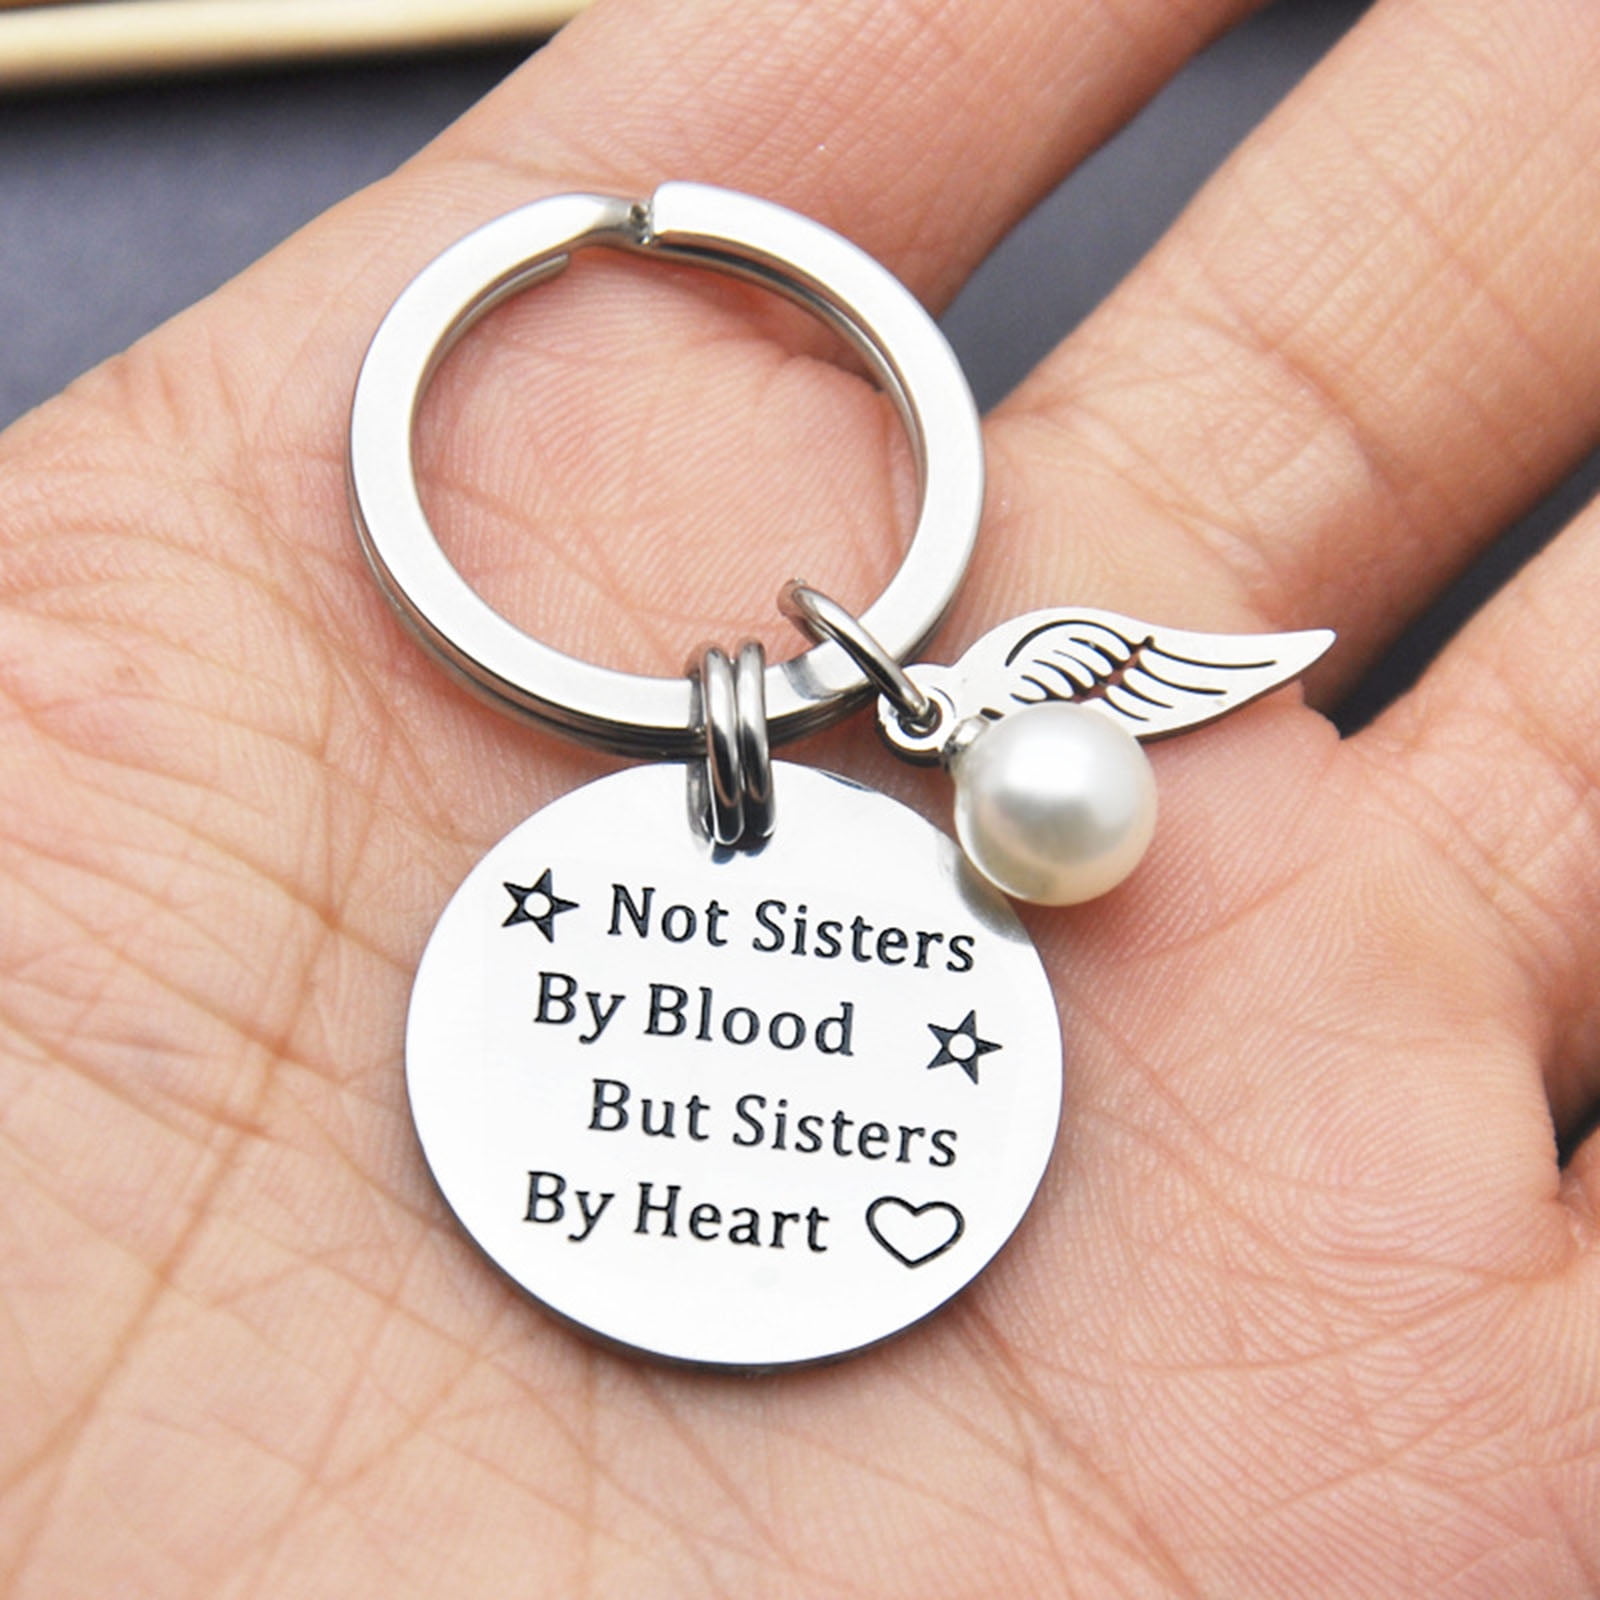 Steel Not Sisters by Blood Pearl Wing Key Chain Bag Pendant Letter Keyring 